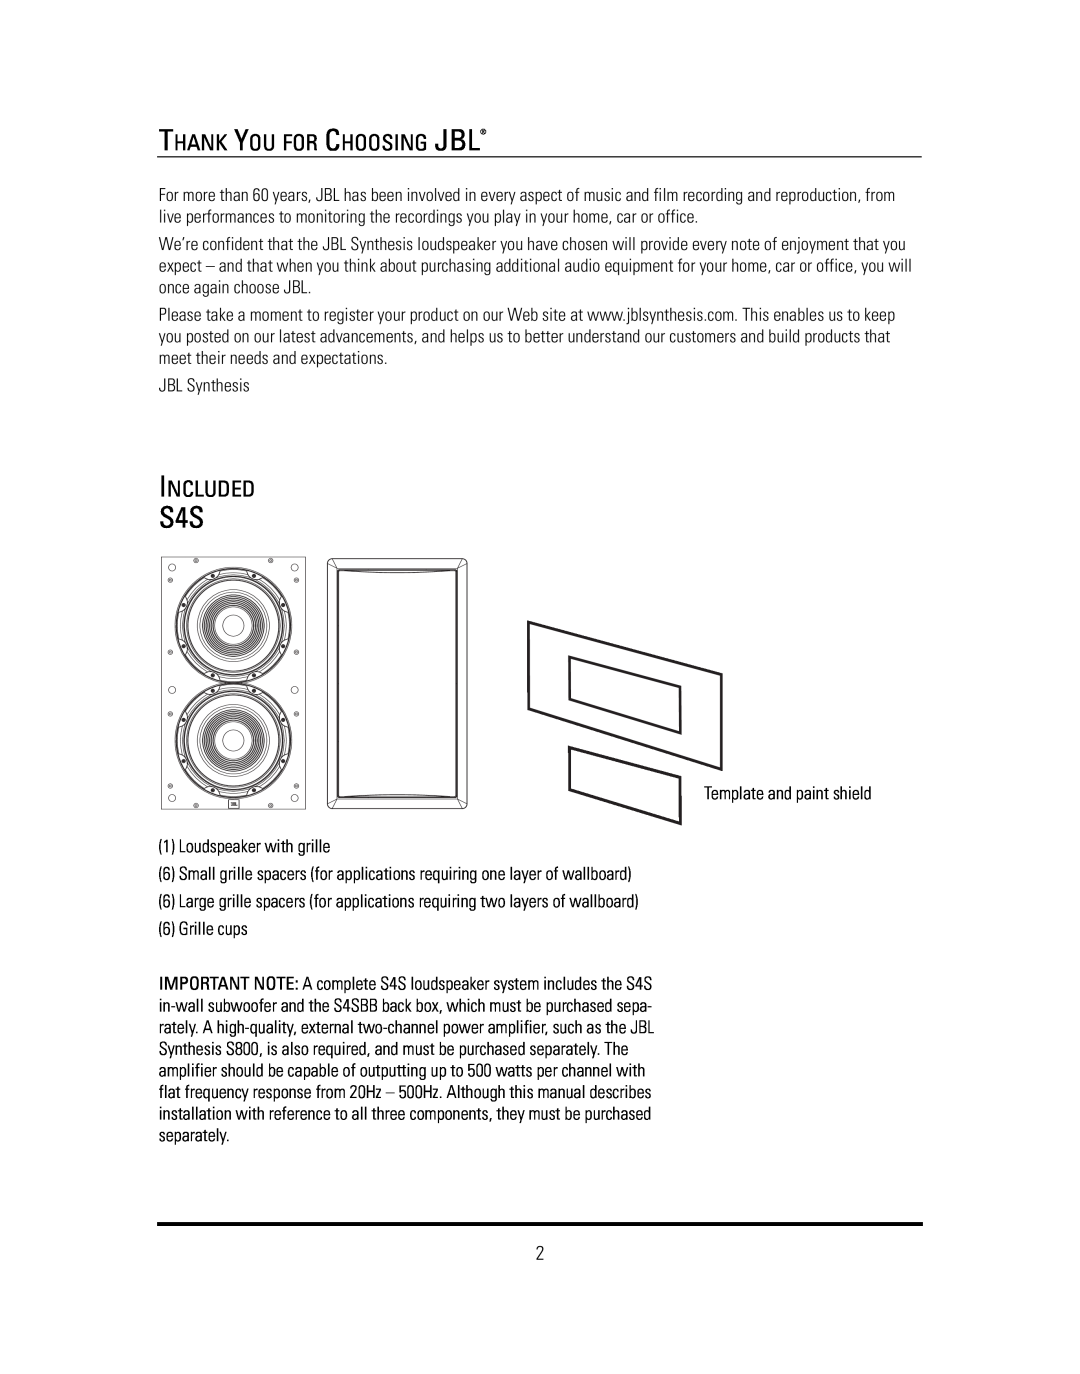 JBL S4S manual Thank You For Choosing Jbl, Included 